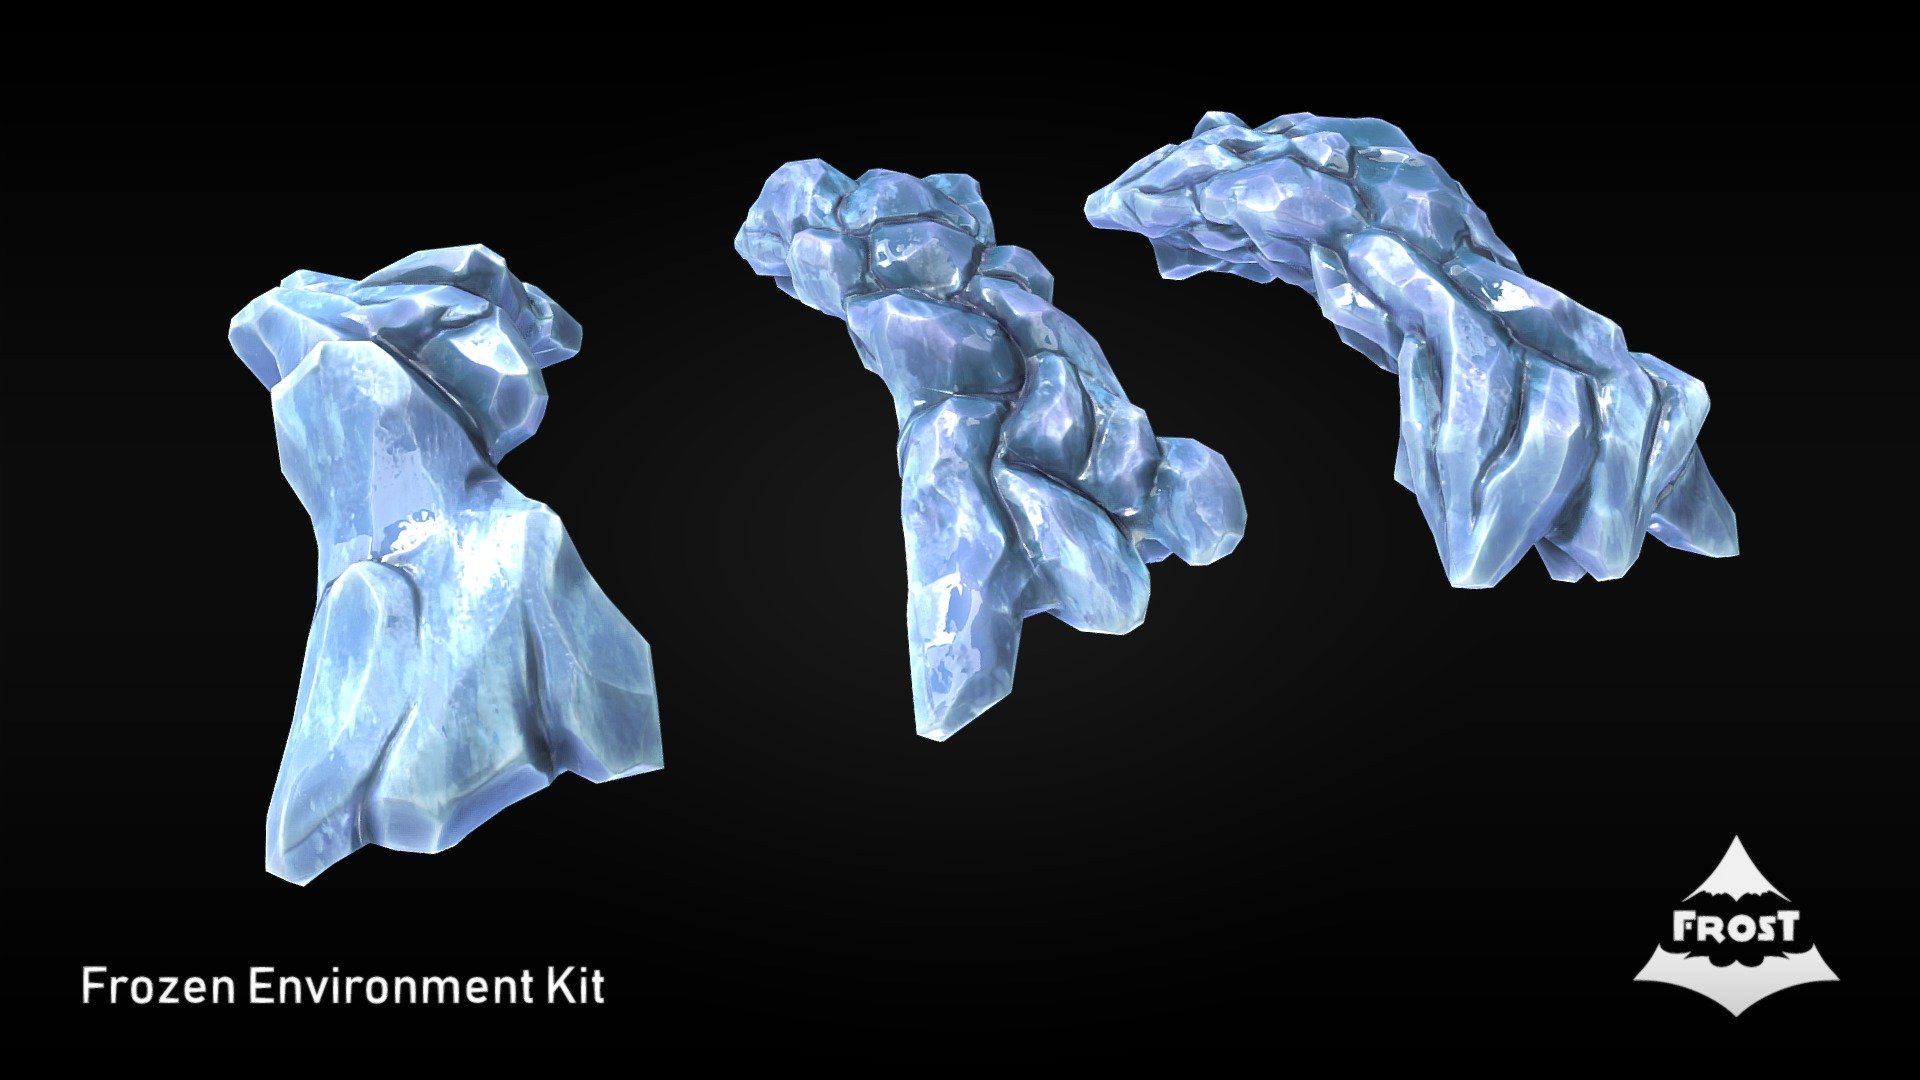 This pack is a fully PBR driven part of my FROST asset pack.
It contains the following assets:


3 Textured Frost Bridges

Each asset comes with 4K resolution Albedo, Glossiness, Roughness, Normal, Emission, Specular Color, Specular Level, AO and Height Maps.
The Height Maps can be used in game or rendering engines to blend other textures with the asset. The textures were atlased onto a single texture sheet.
All of the assets are based on manually created high poly sculpts and had their textures specifically created for them. They were optimized for use in realtime game engines.
As PBR assets they are recommended for desktop but the polycount will have no problem running on mobile as well and can still be further reduced if necessary.

The FROST Environment Kit is split as separate packages so that you can purchase only those assets that you really need, for a significantly lower price compared to a full asset pack 3d model